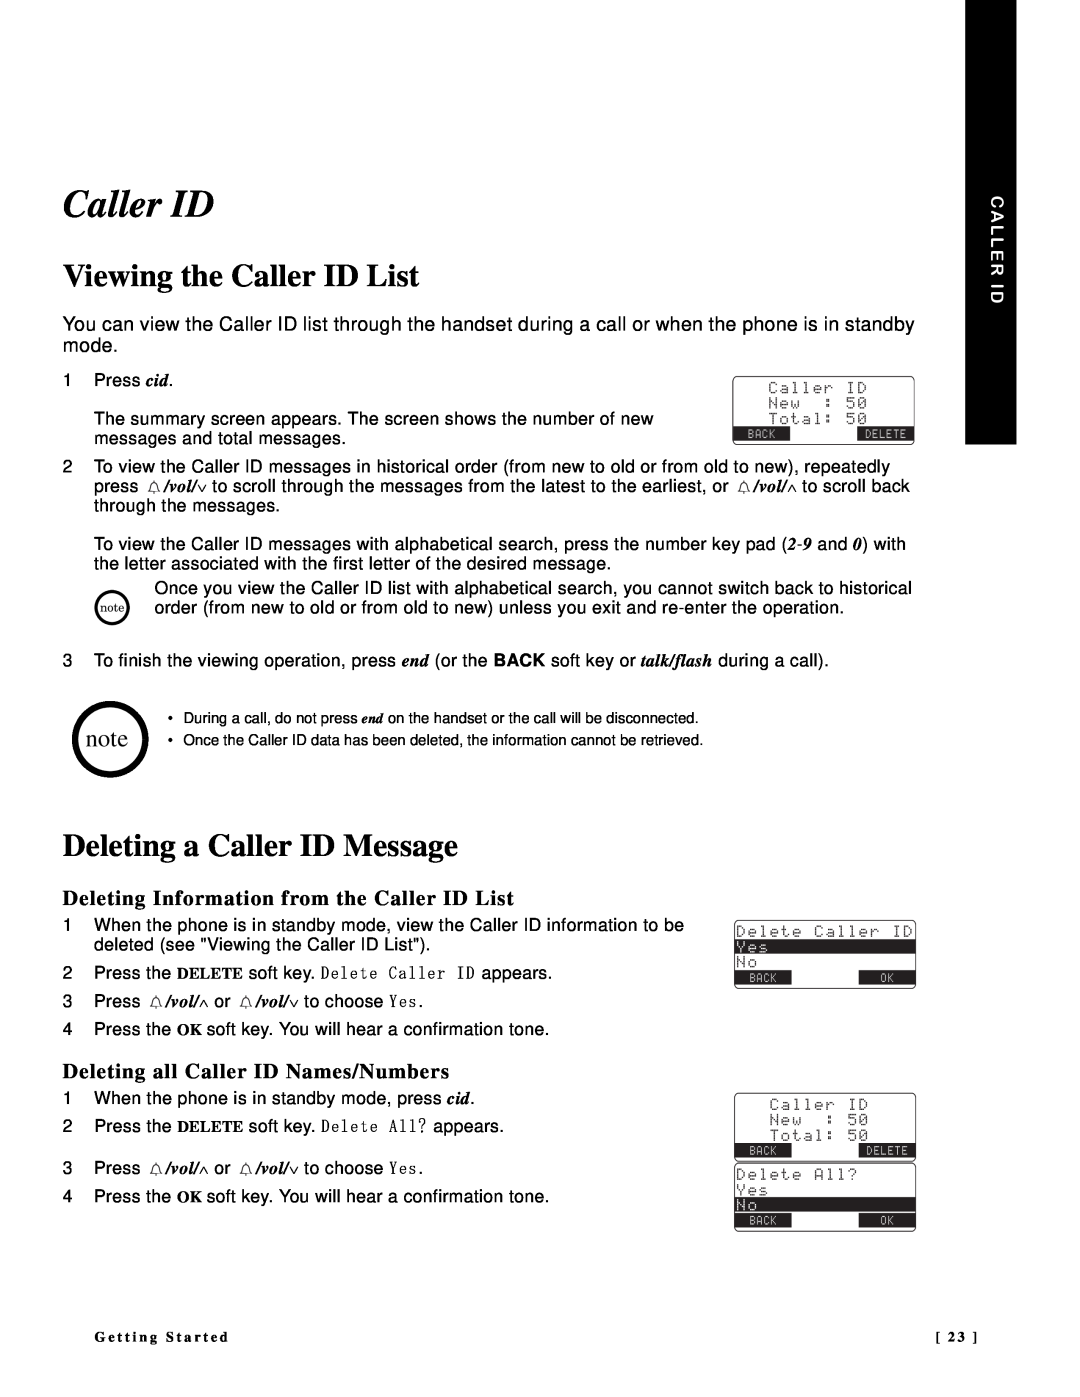 NEC DTR-IR-2 Viewing the Caller ID List, Deleting a Caller ID Message, Deleting Information from the Caller ID List 